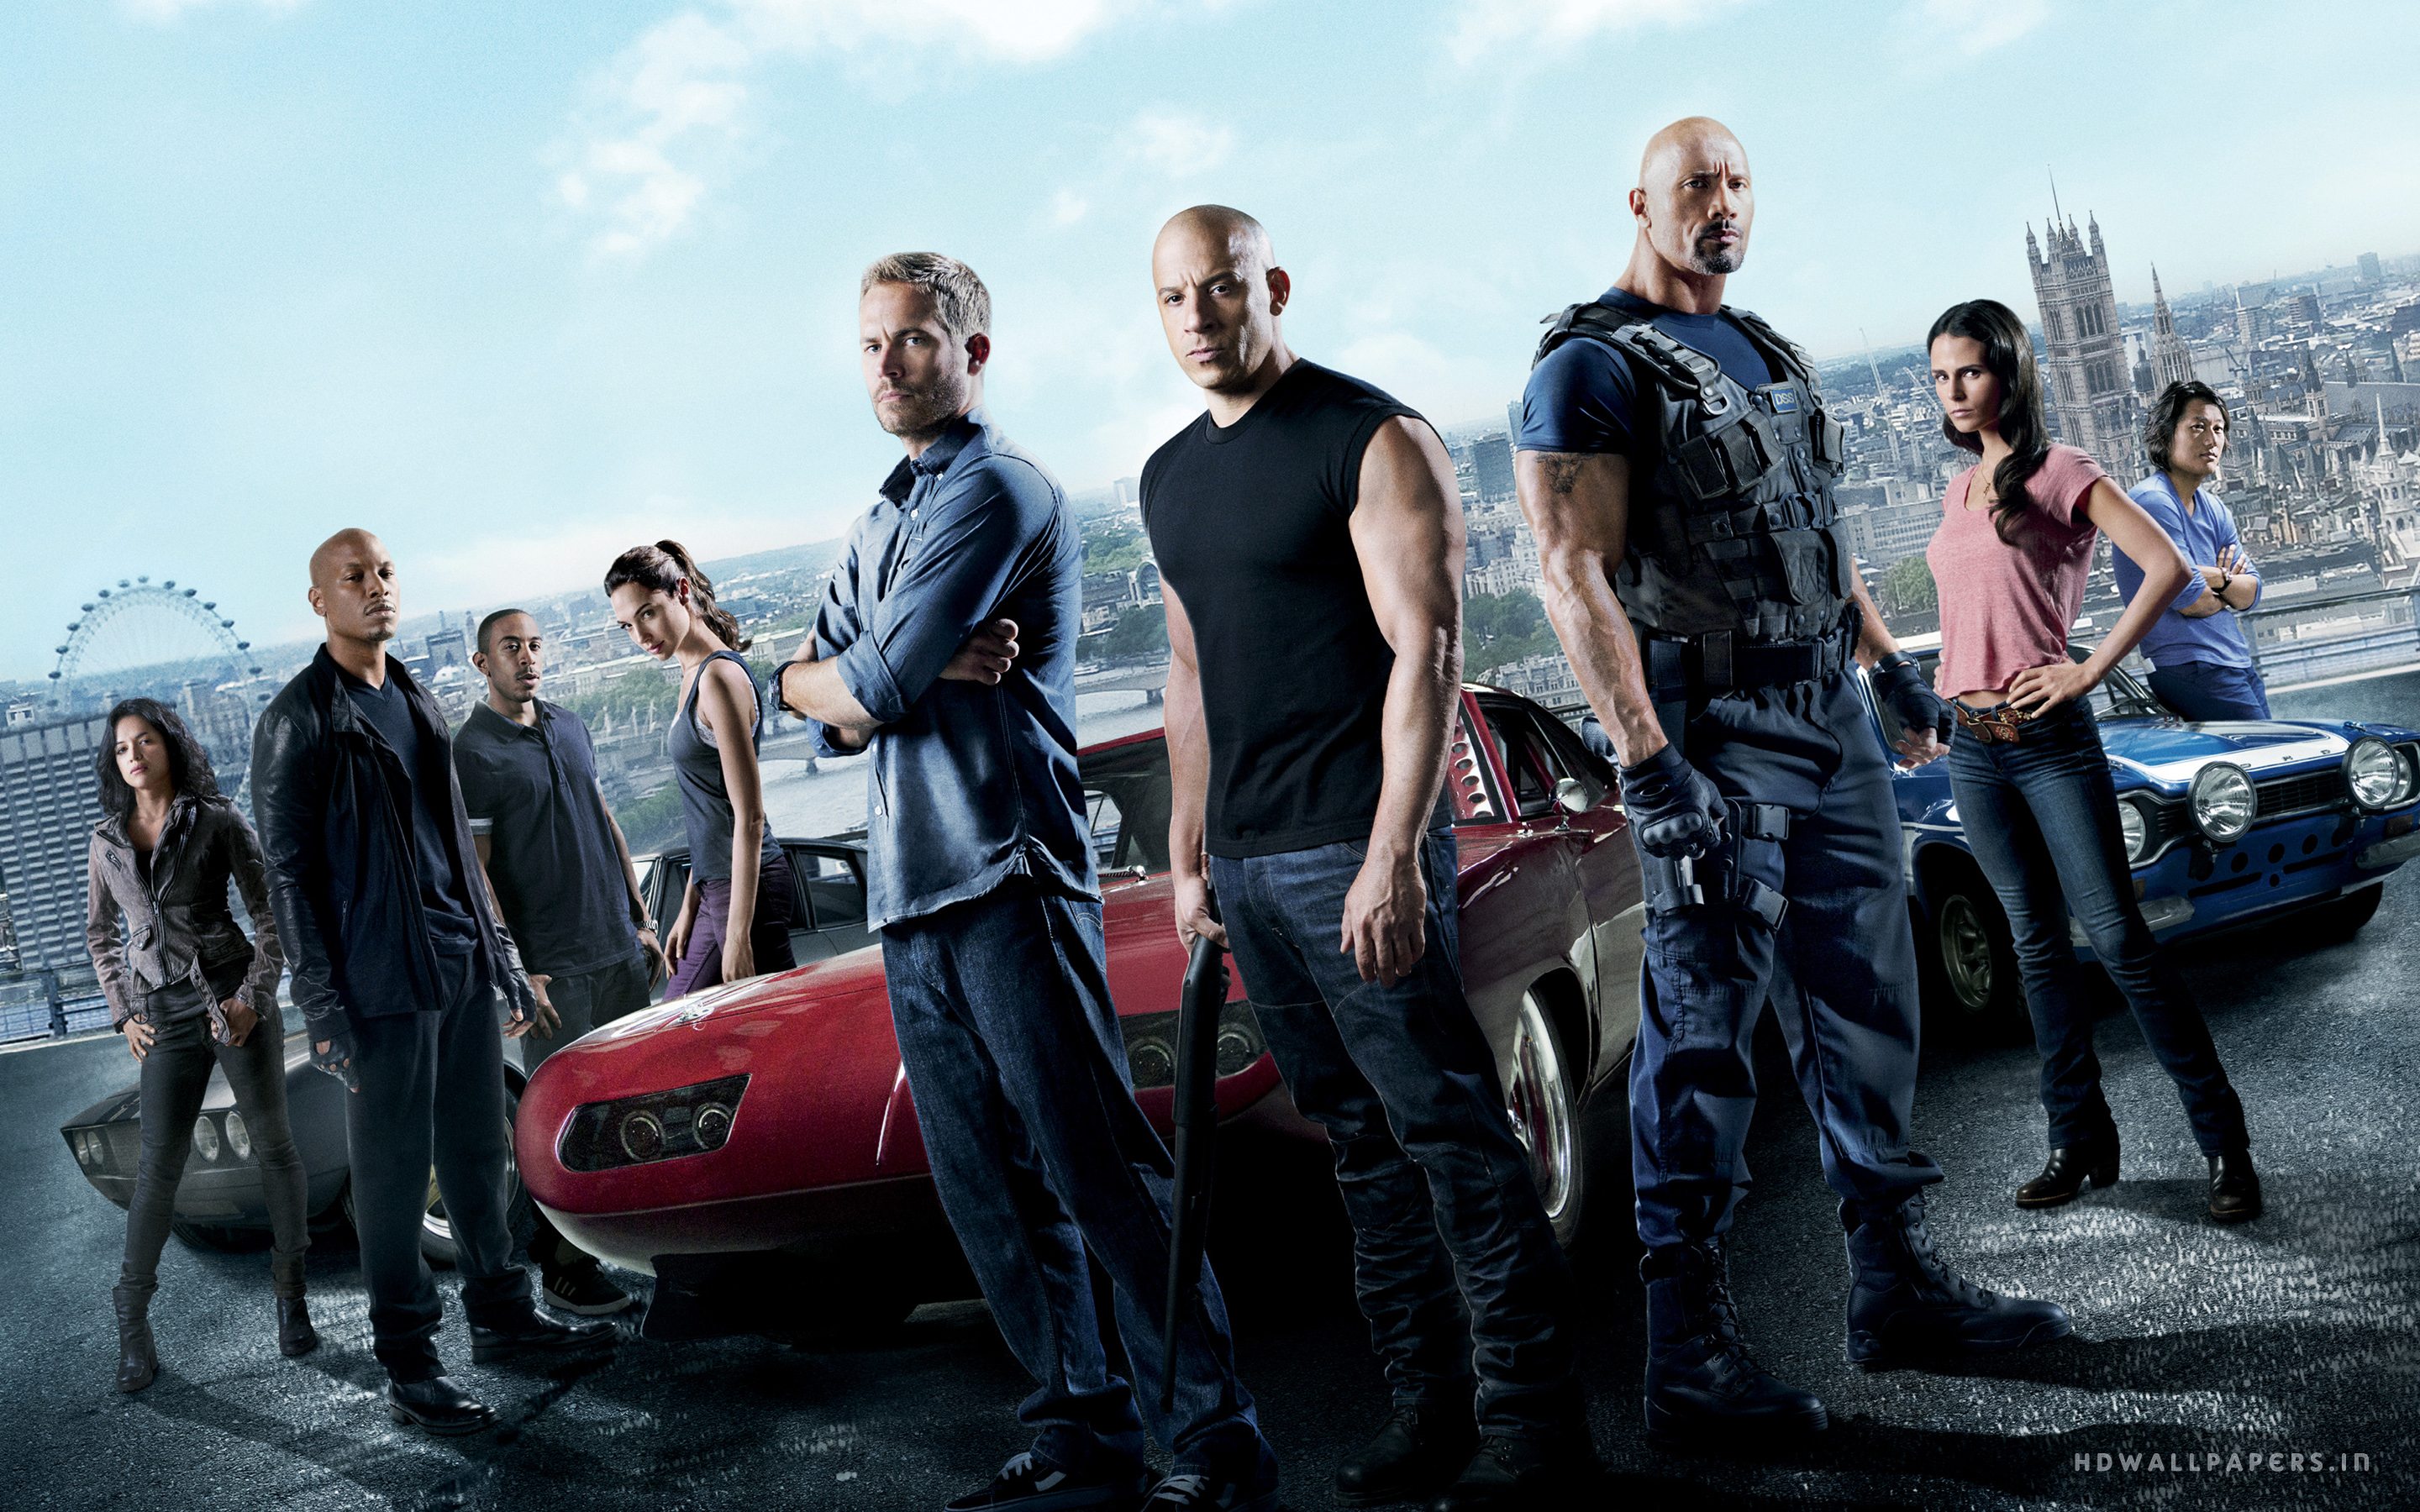 Movie Review: Fast & Furious 6 is action packed with layered story